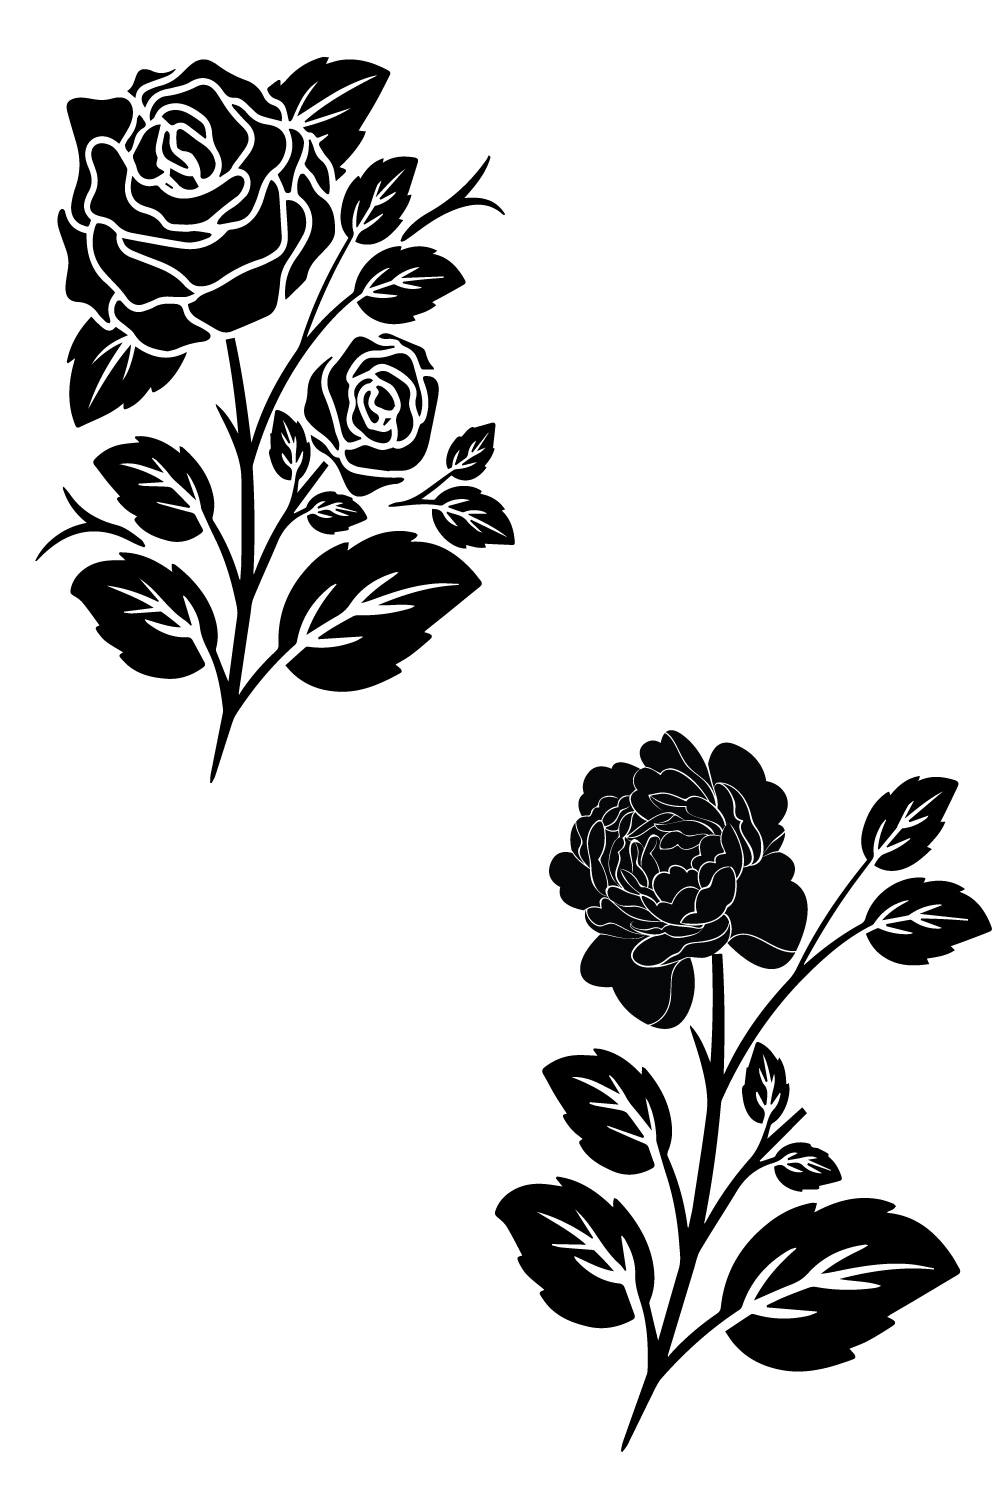 Hand drawn rose silhouette pinterest preview image.